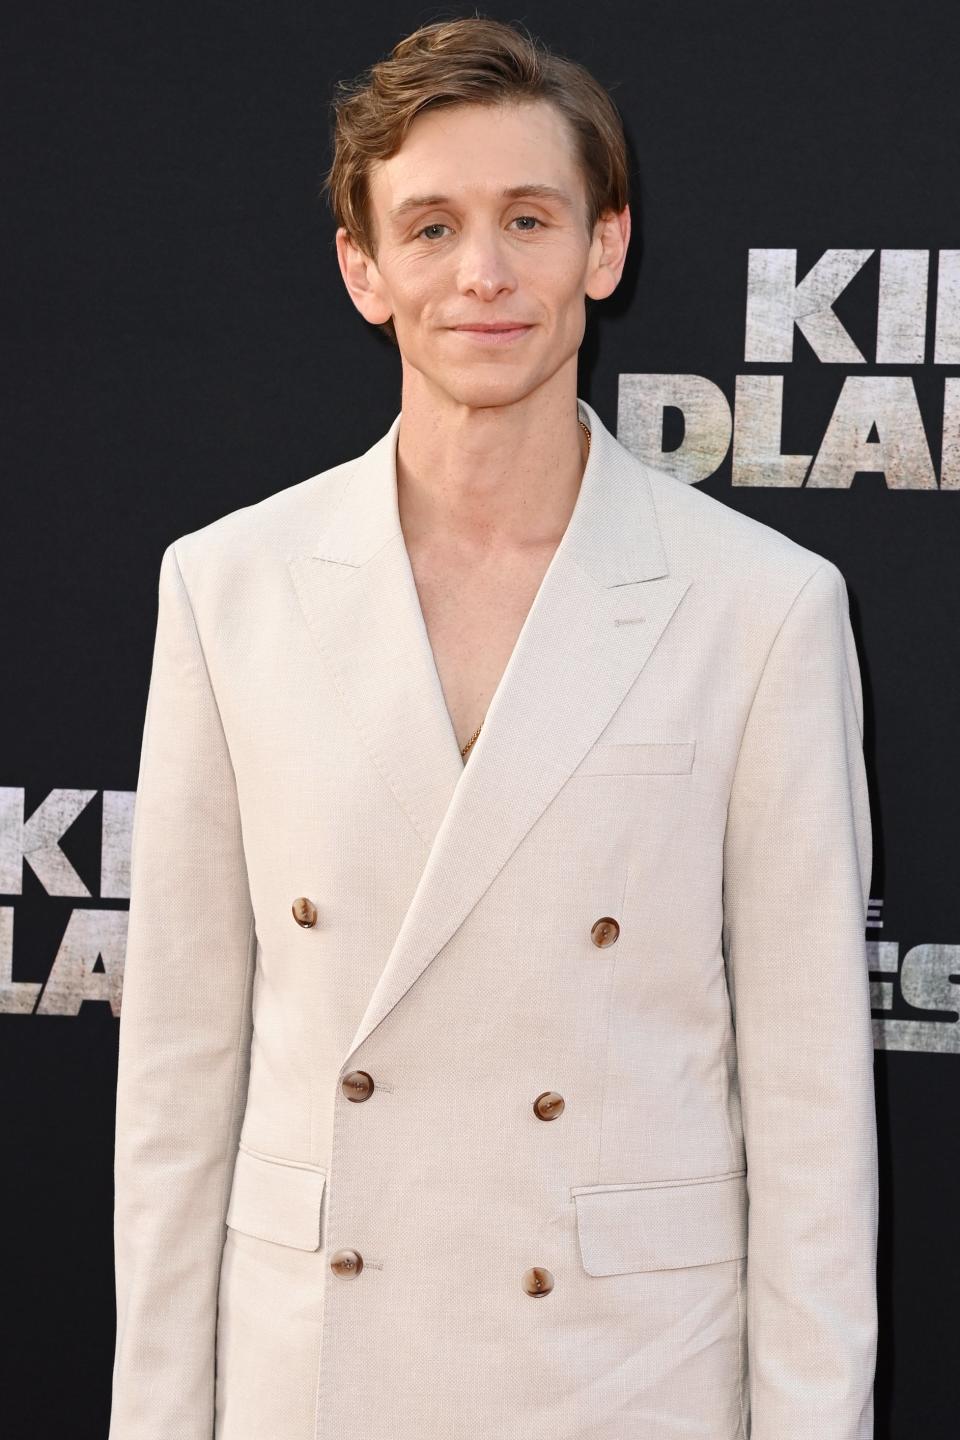 Travis Jeffery in a double-breasted cream suit stands smiling at a premiere event for the Kingdom of the Planet of the Apes